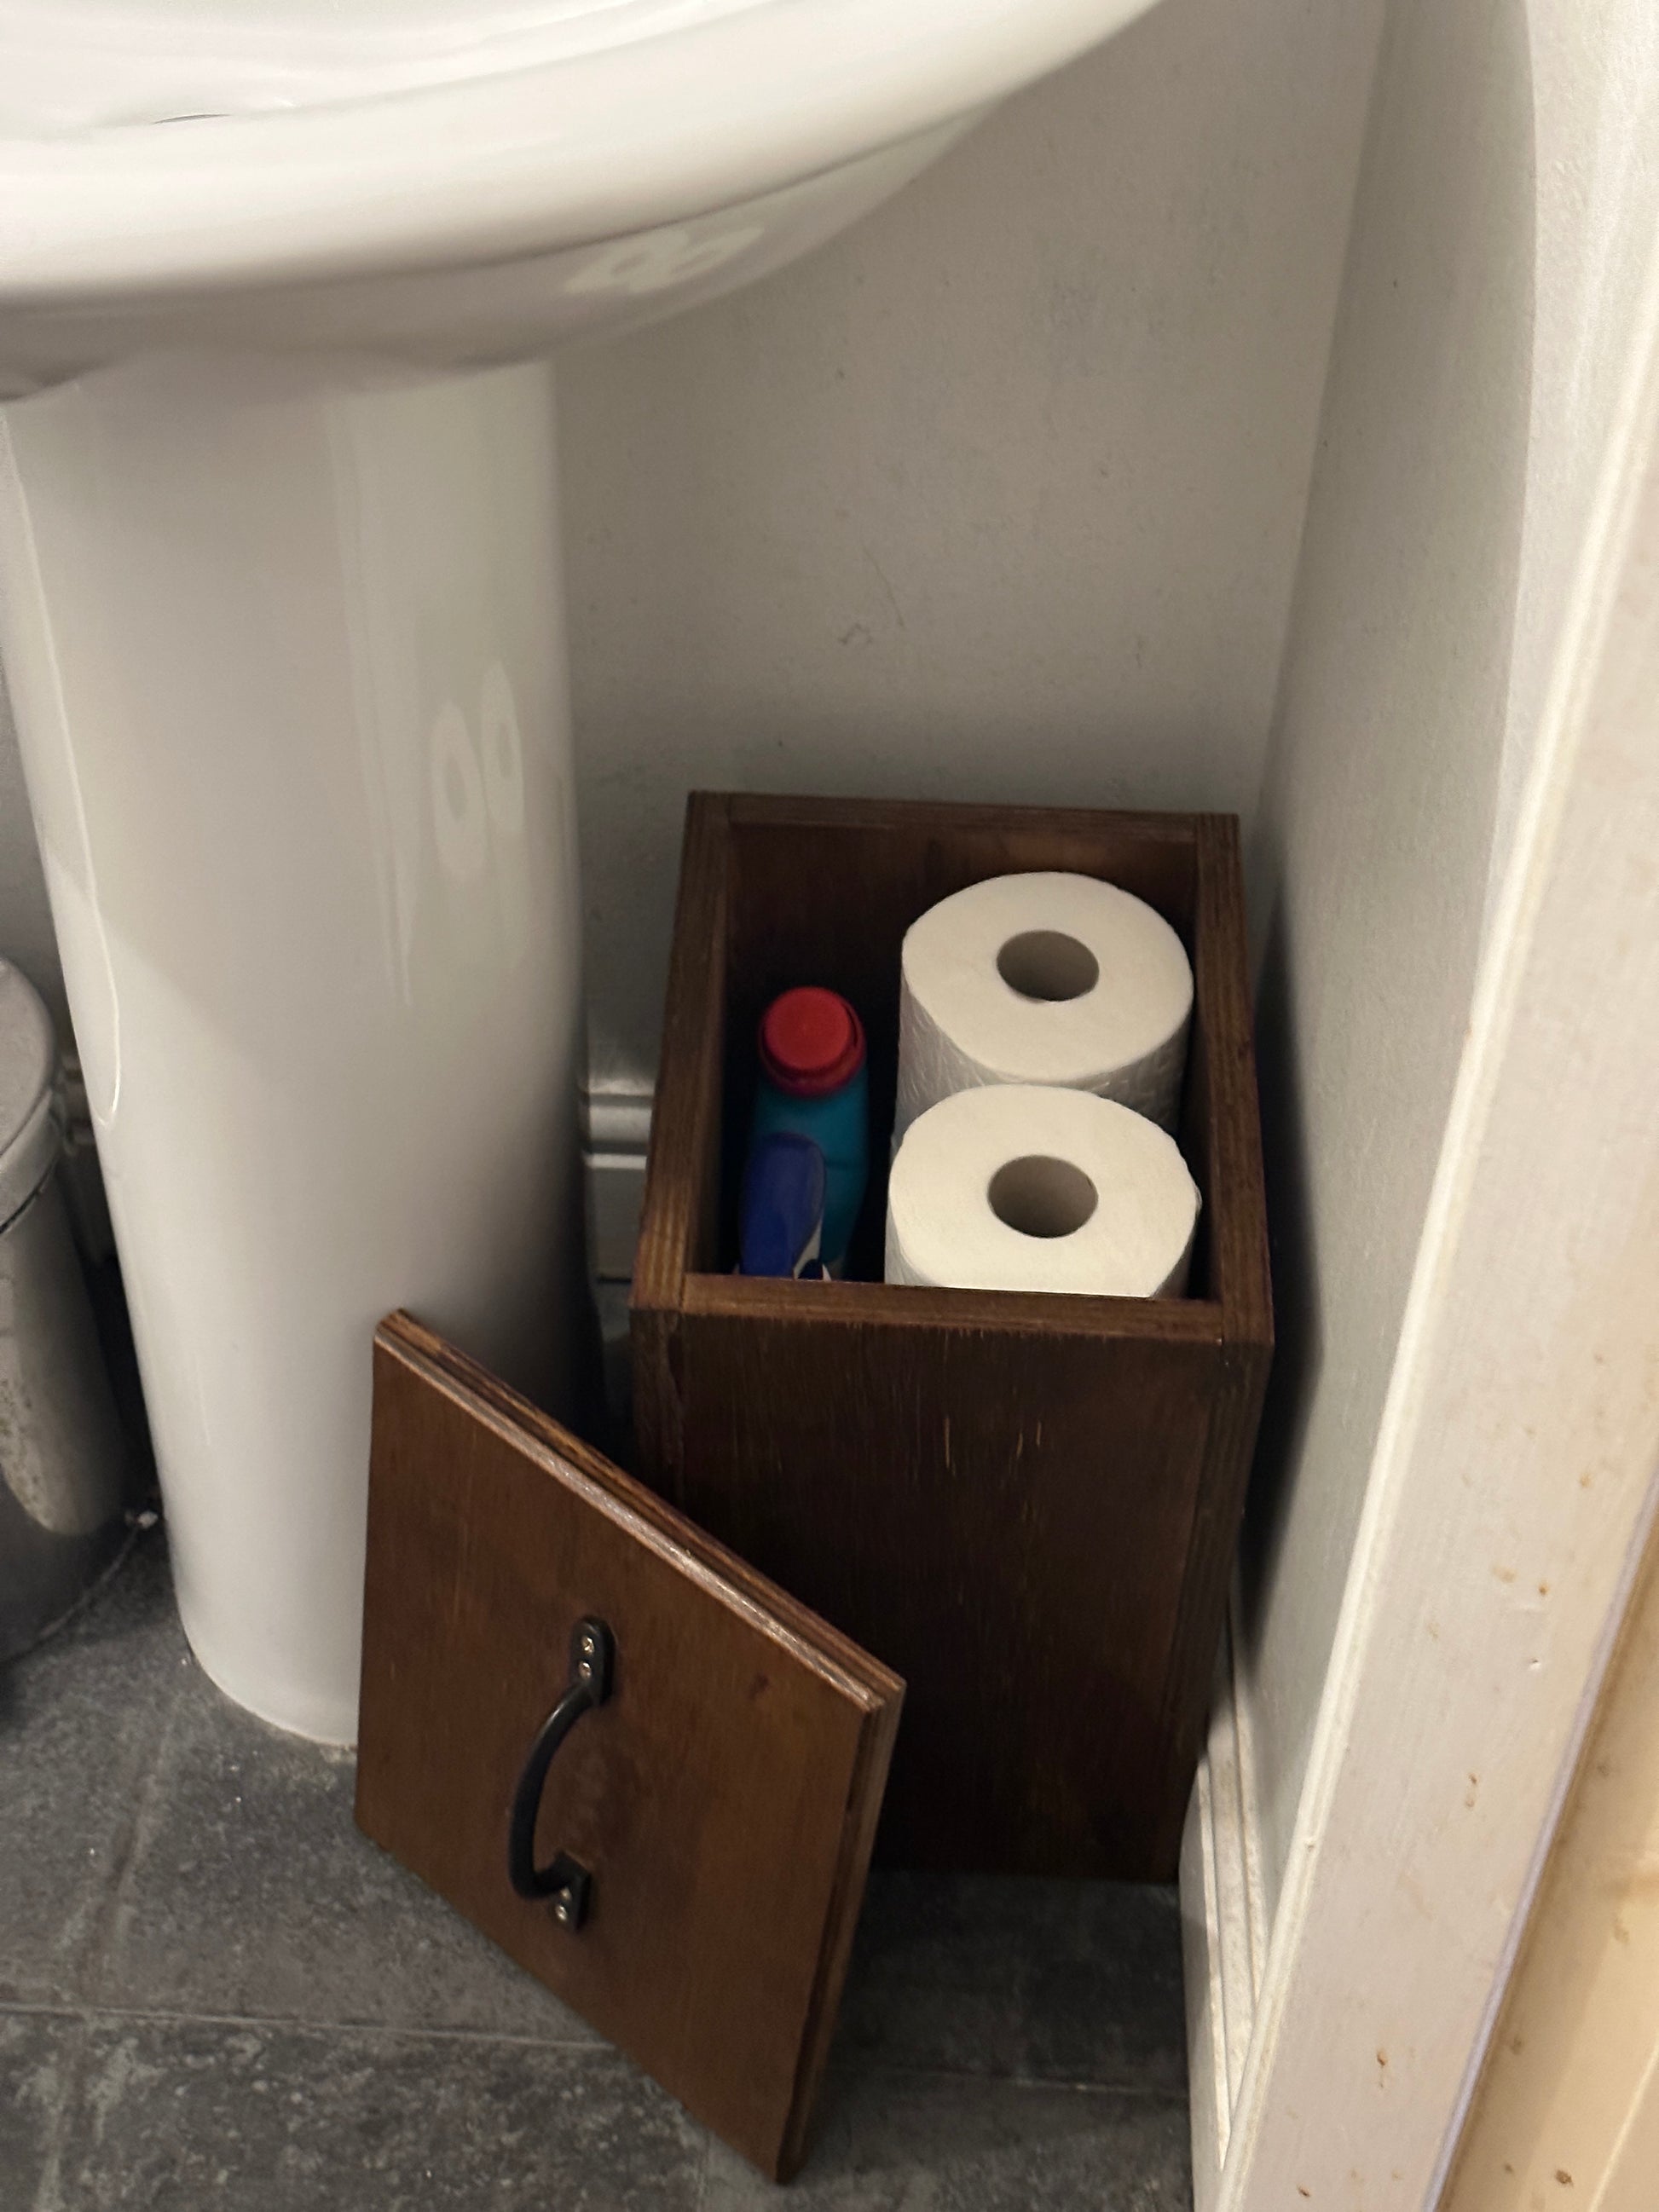 Slim Oak Stained Ply Bathroom Storage Unit, Toilet Roll Paper Holder Cabinet